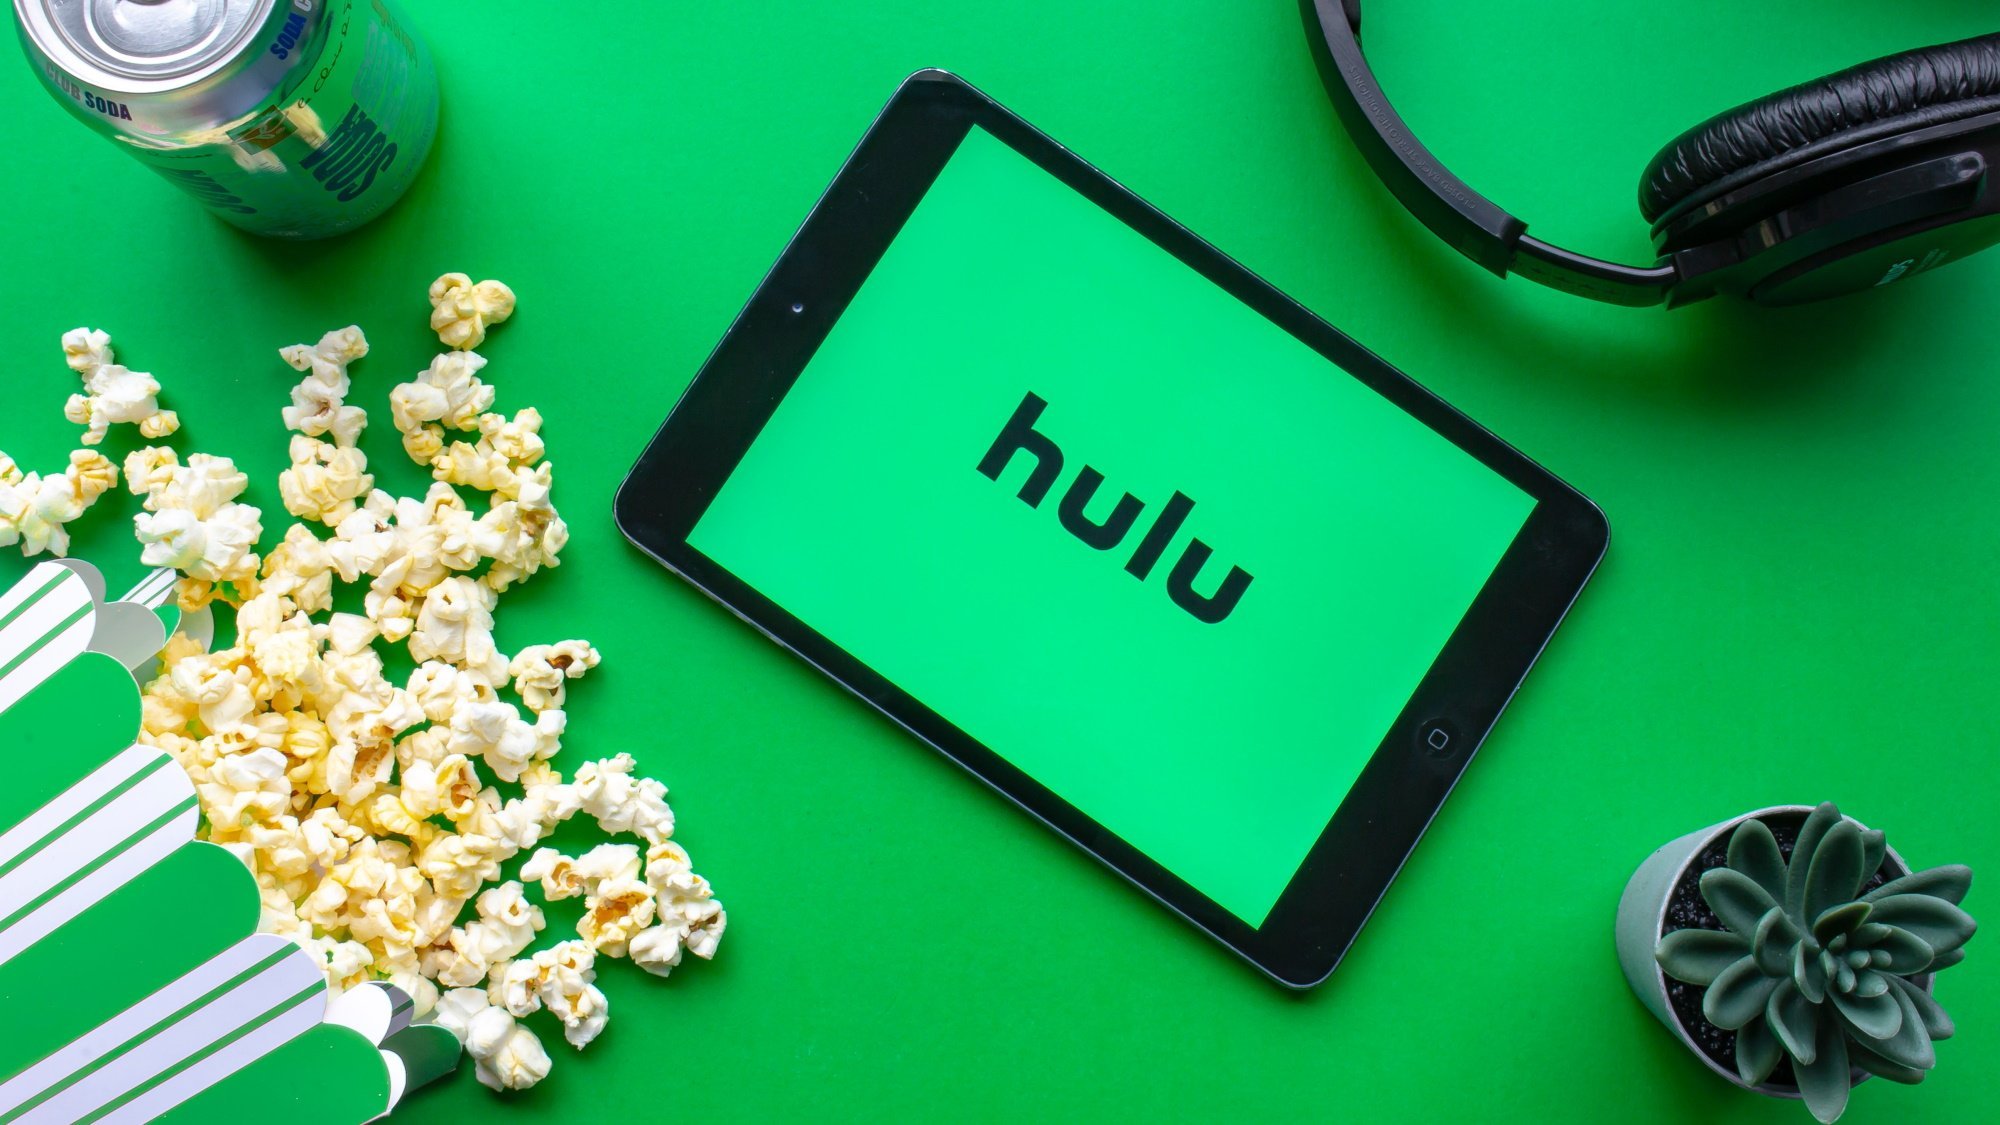 Here's how to get Hulu and Disney Plus for under $5